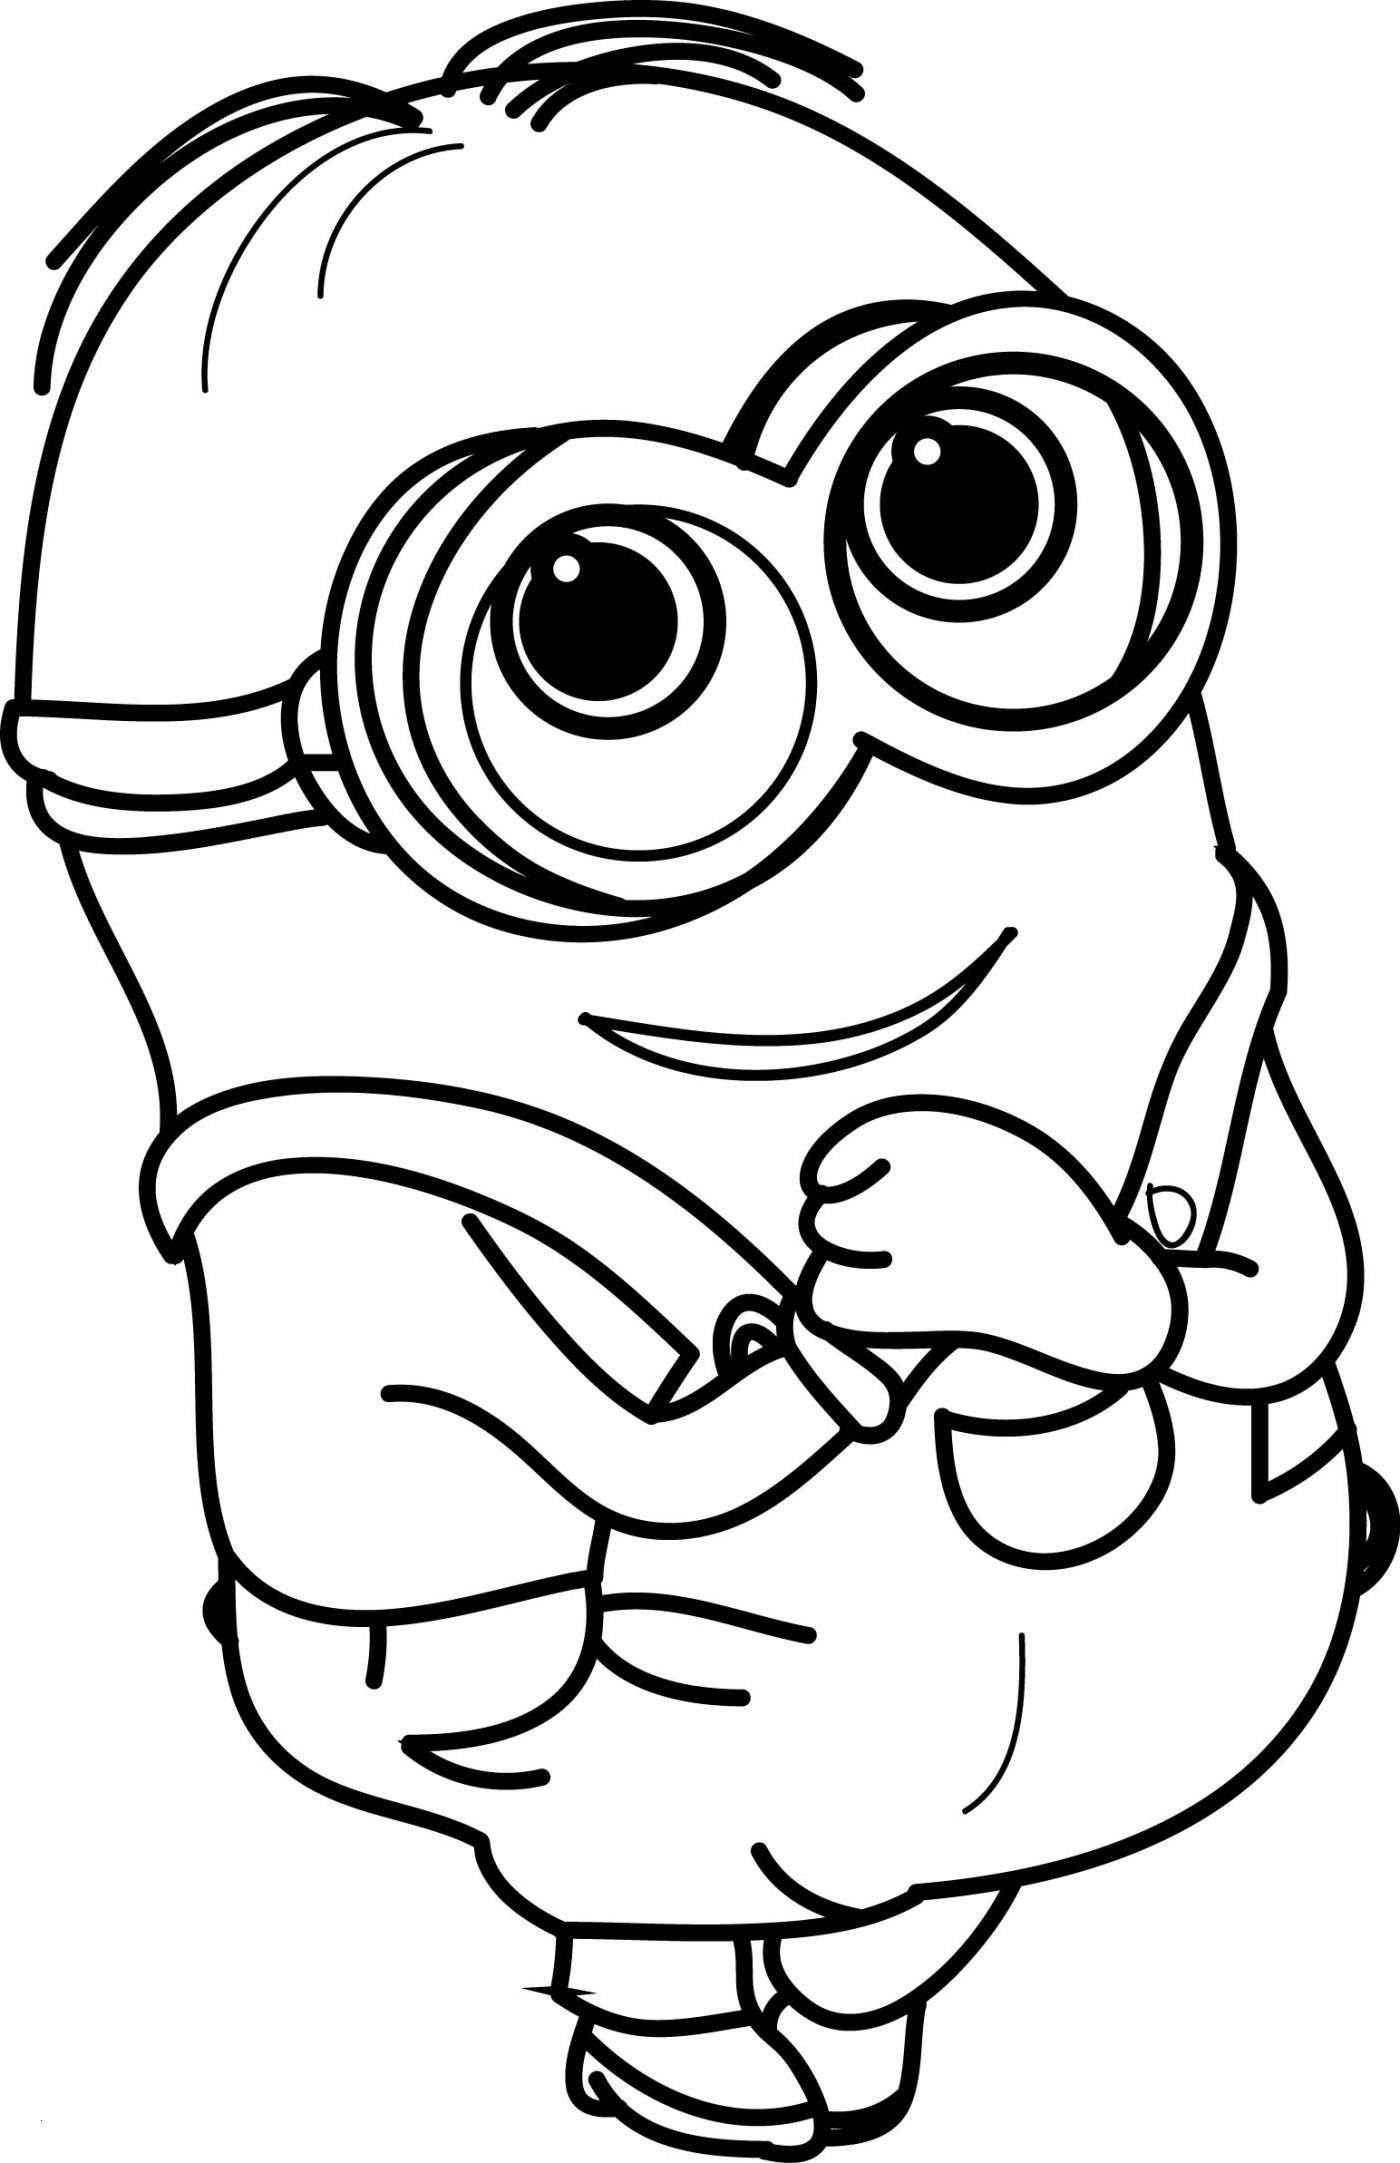 Minion Coloring Book (With Images) | Minion Coloring Pages innen Minion Malvorlage